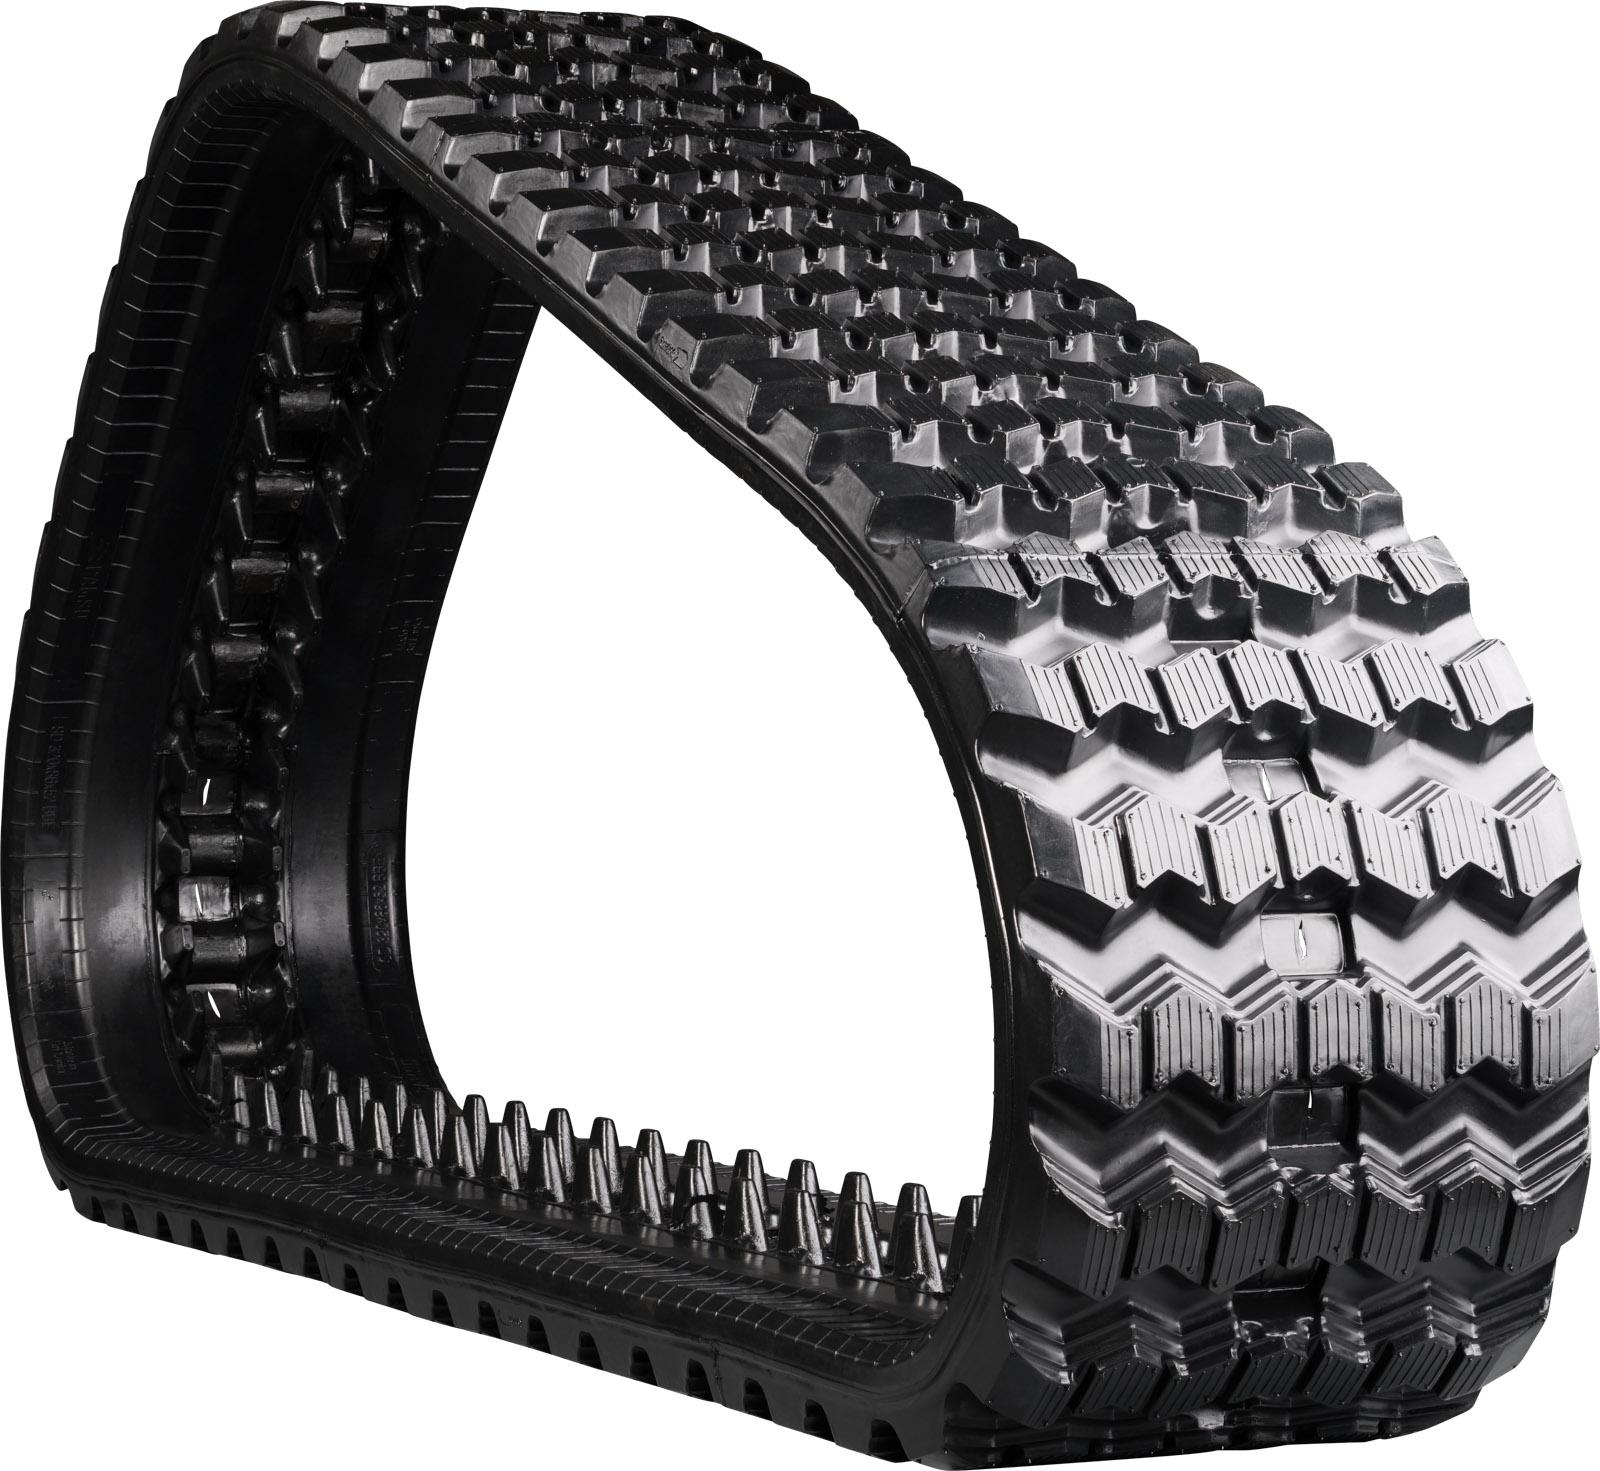 set of 2 13" camso heavy duty sawtooth pattern rubber track (320x86tx52)